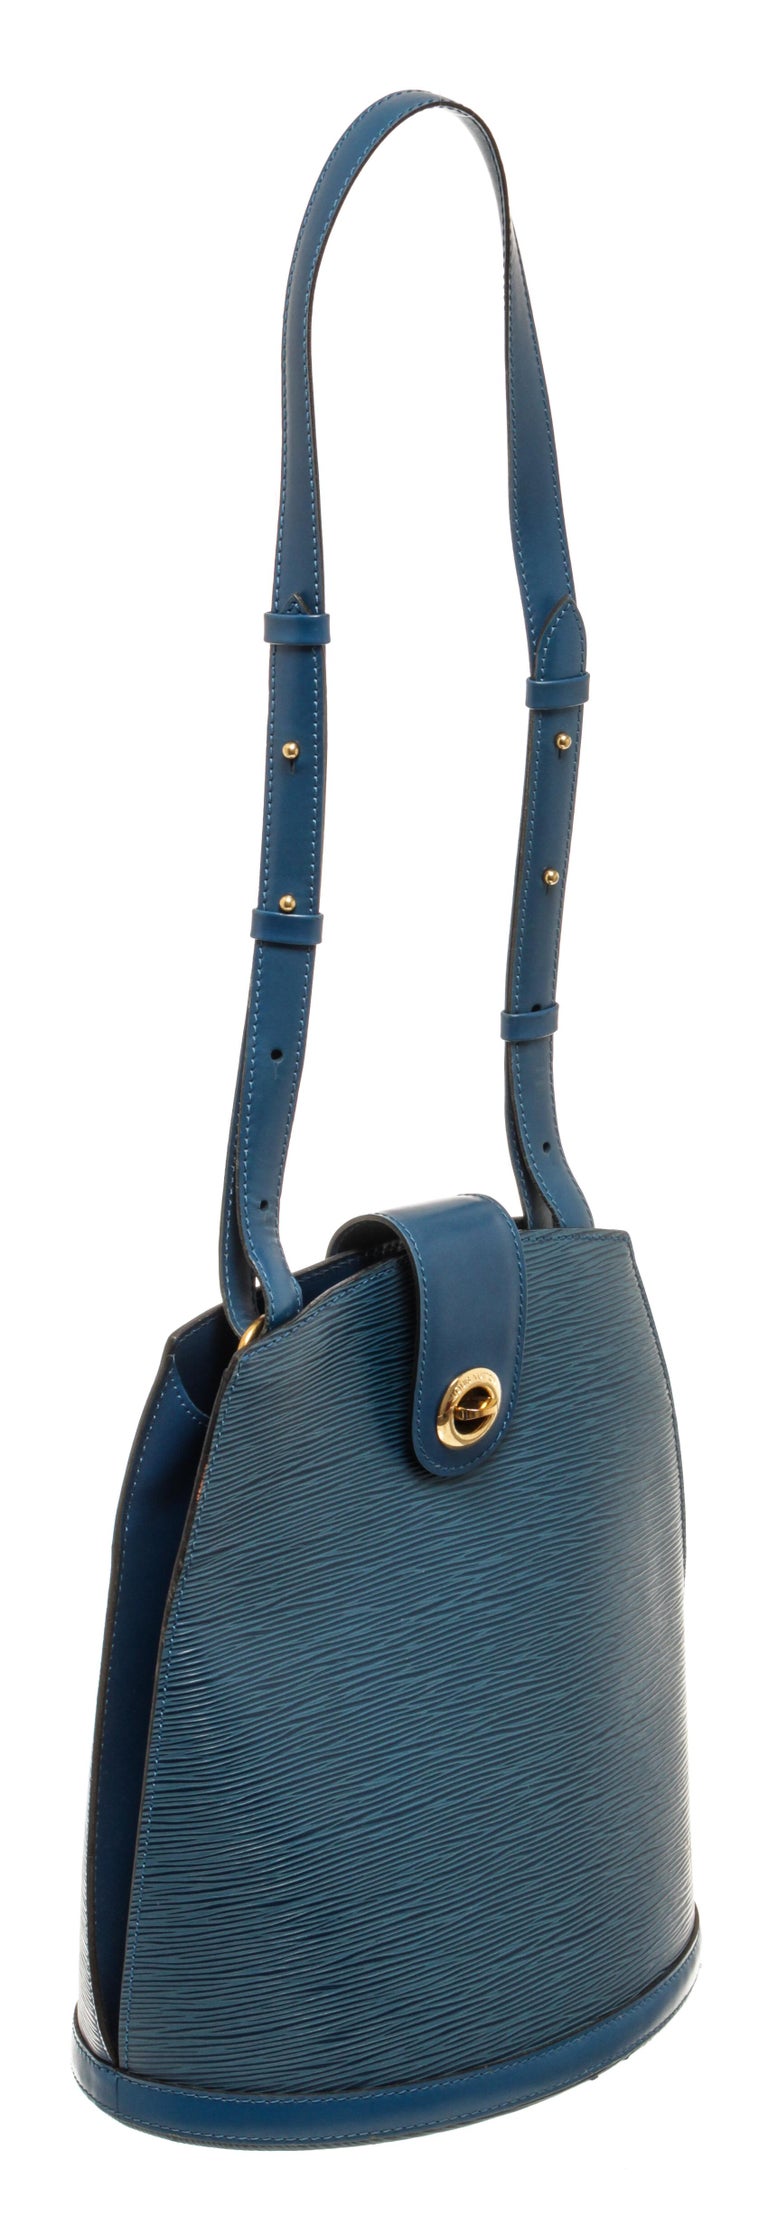 Louis Vuitton Blue Epi Cluny with adjustable shoulder strap, suede lining, interior pocket, gold tone hardware and turn lock closure

76926MSC